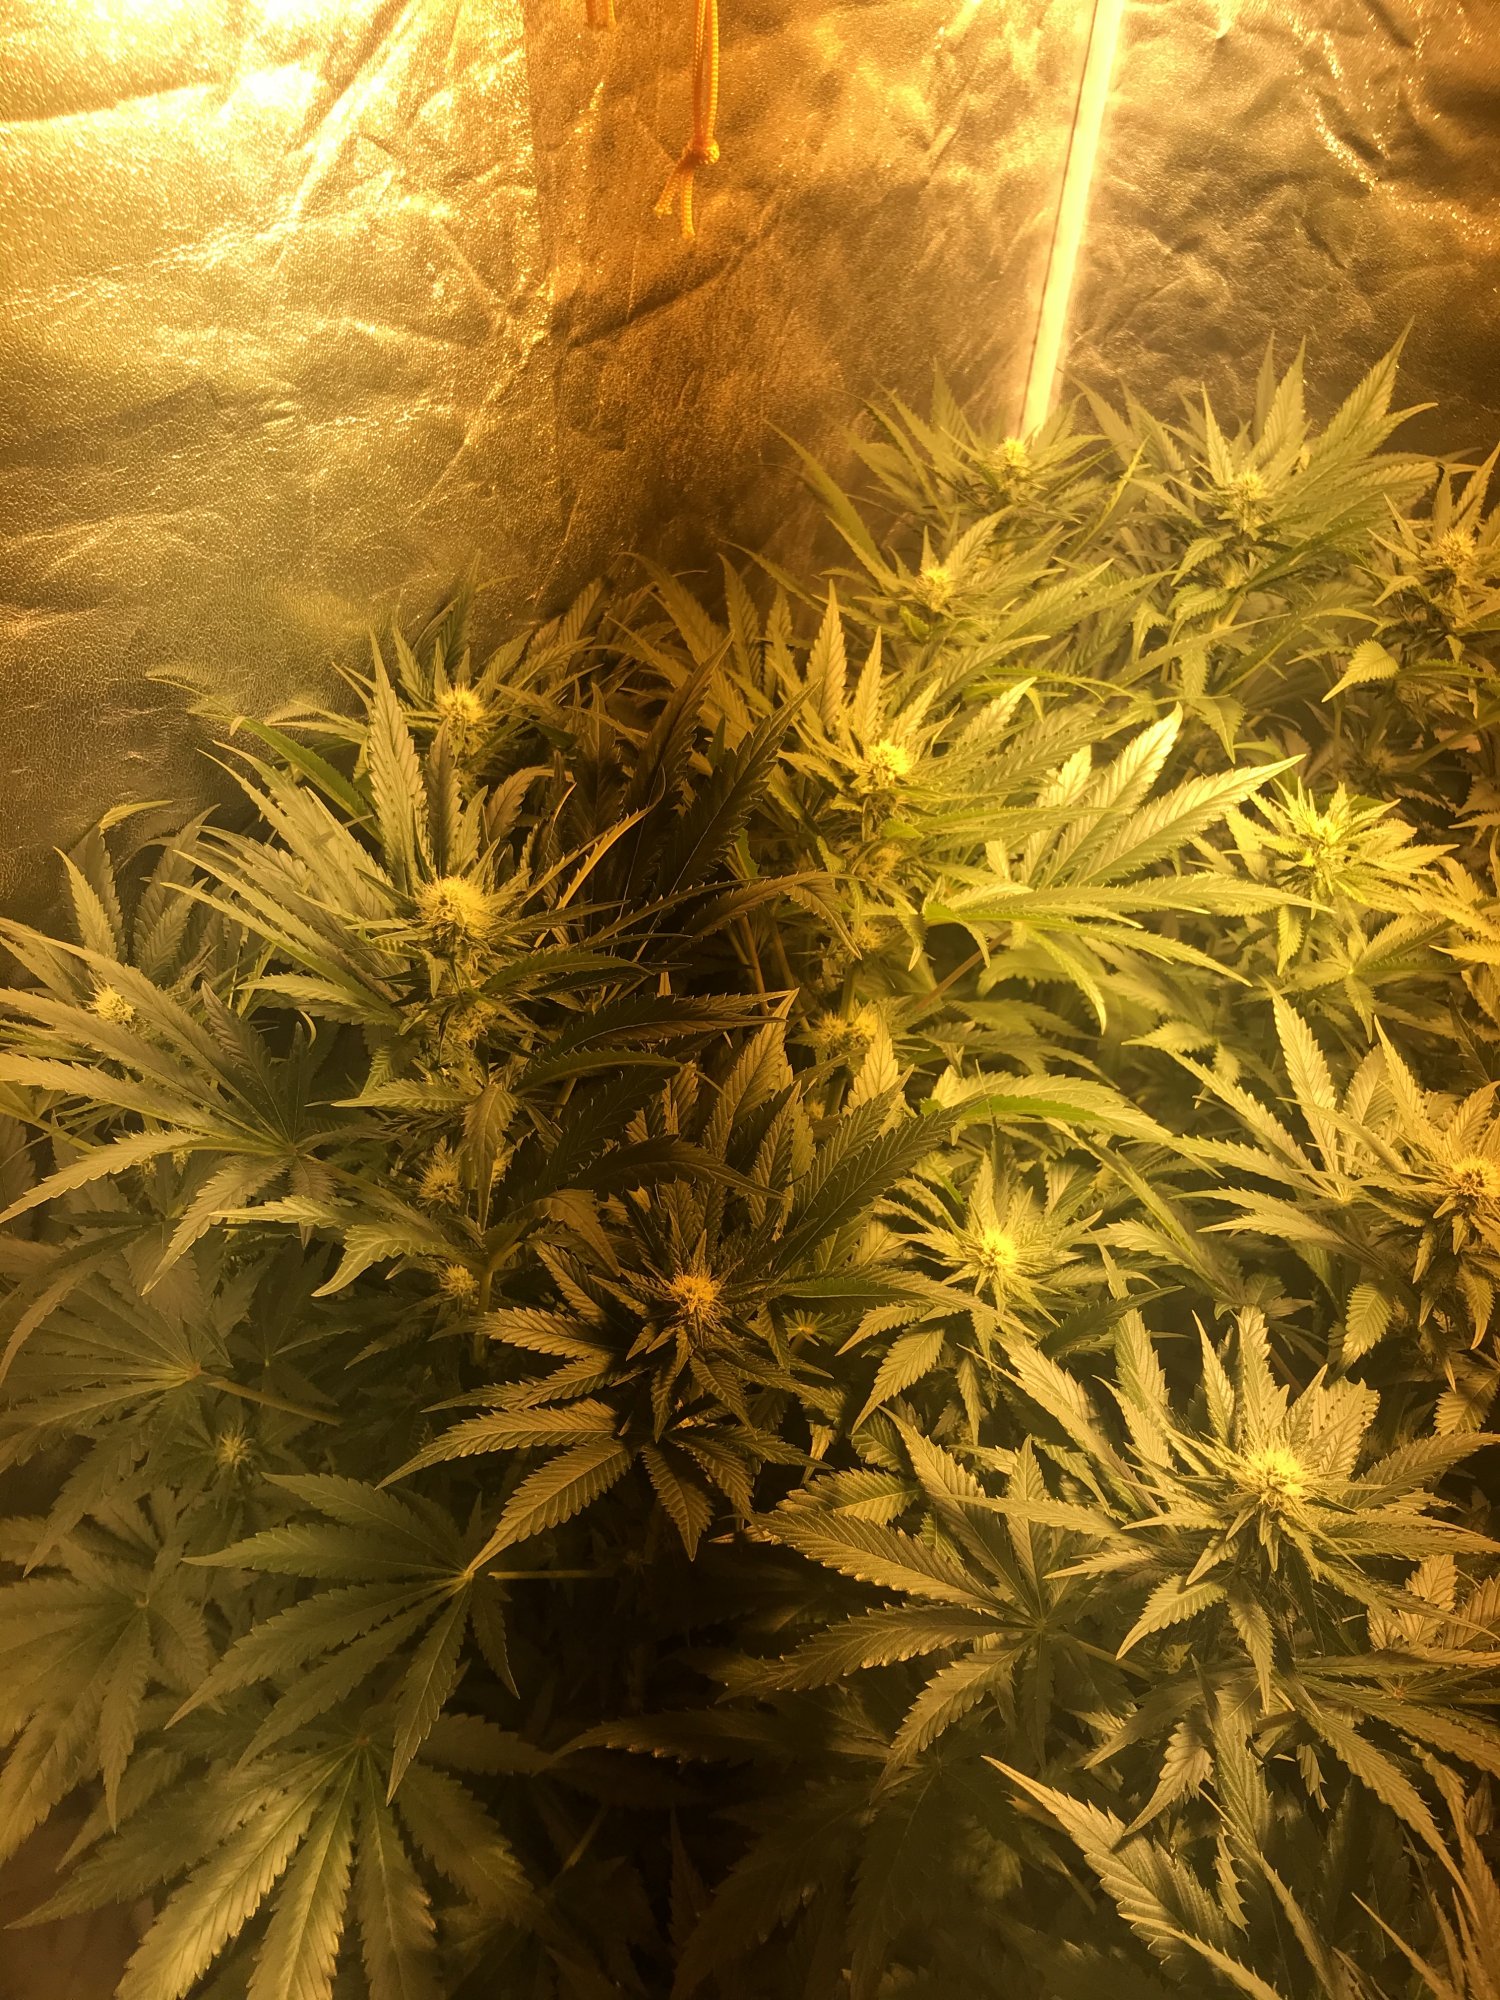 Please have a look at my plants 3 weeks into flower today 8